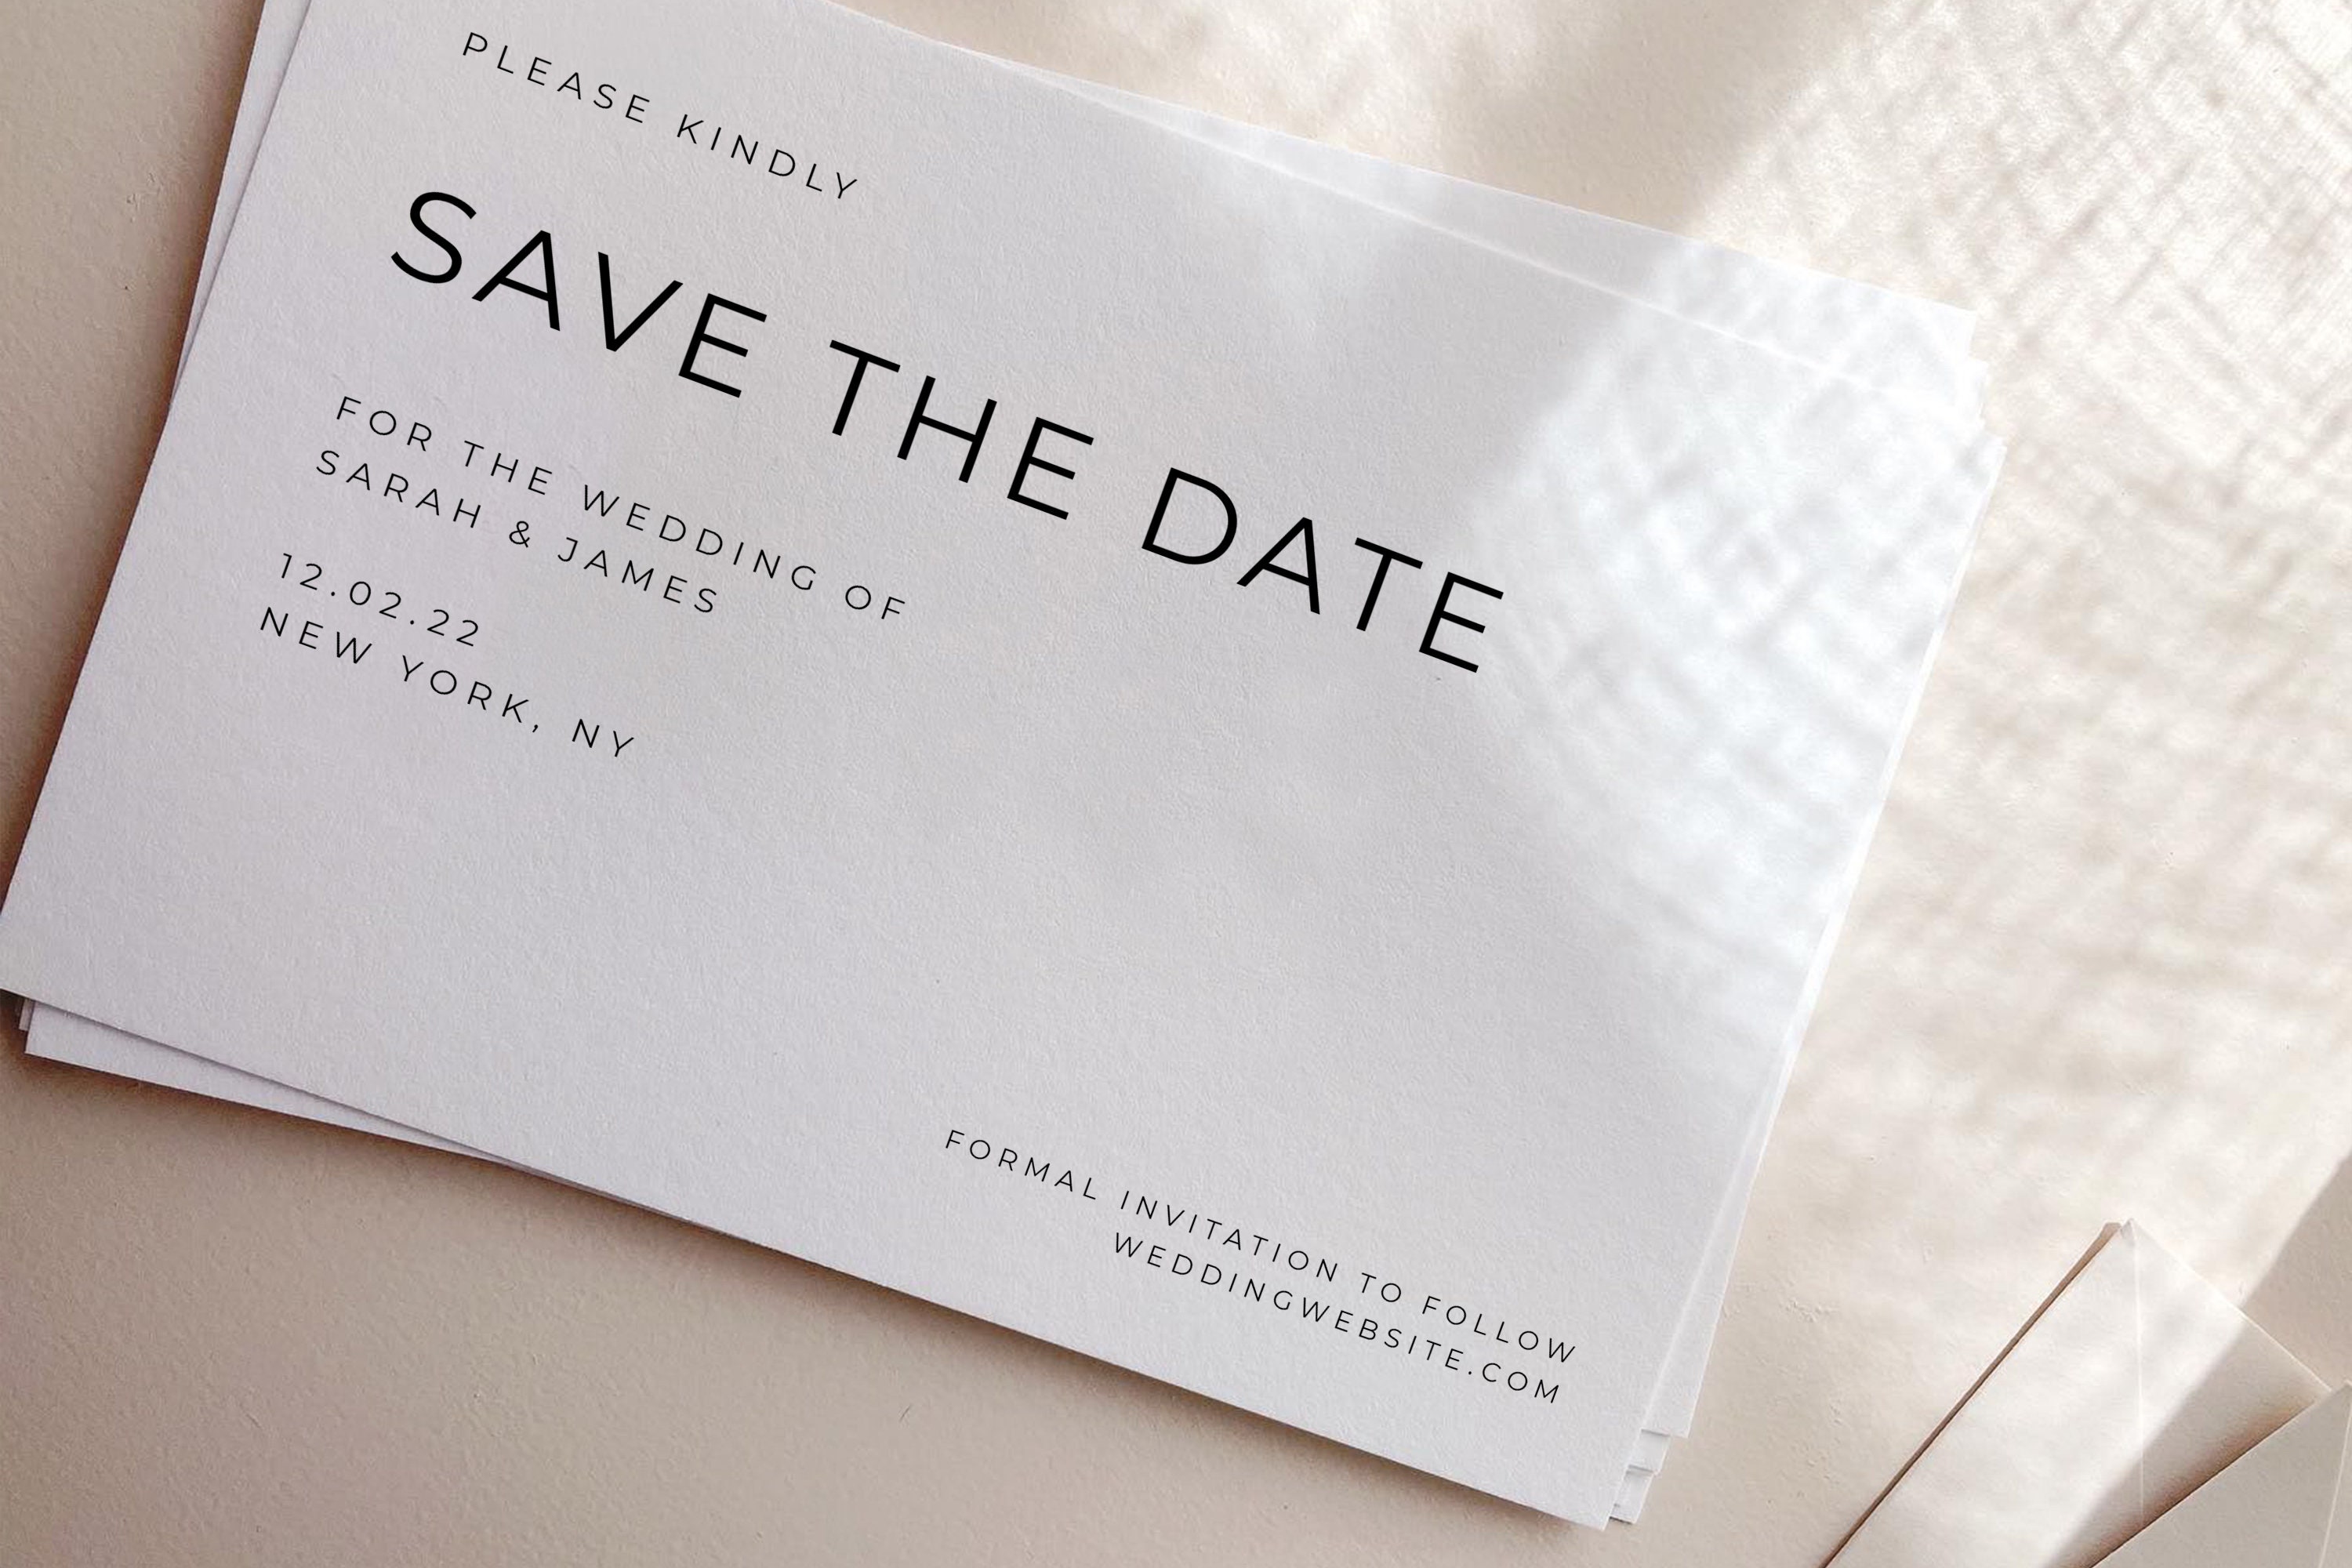 ANNA Save the Date Card With Envelopes, Digital File for Print at